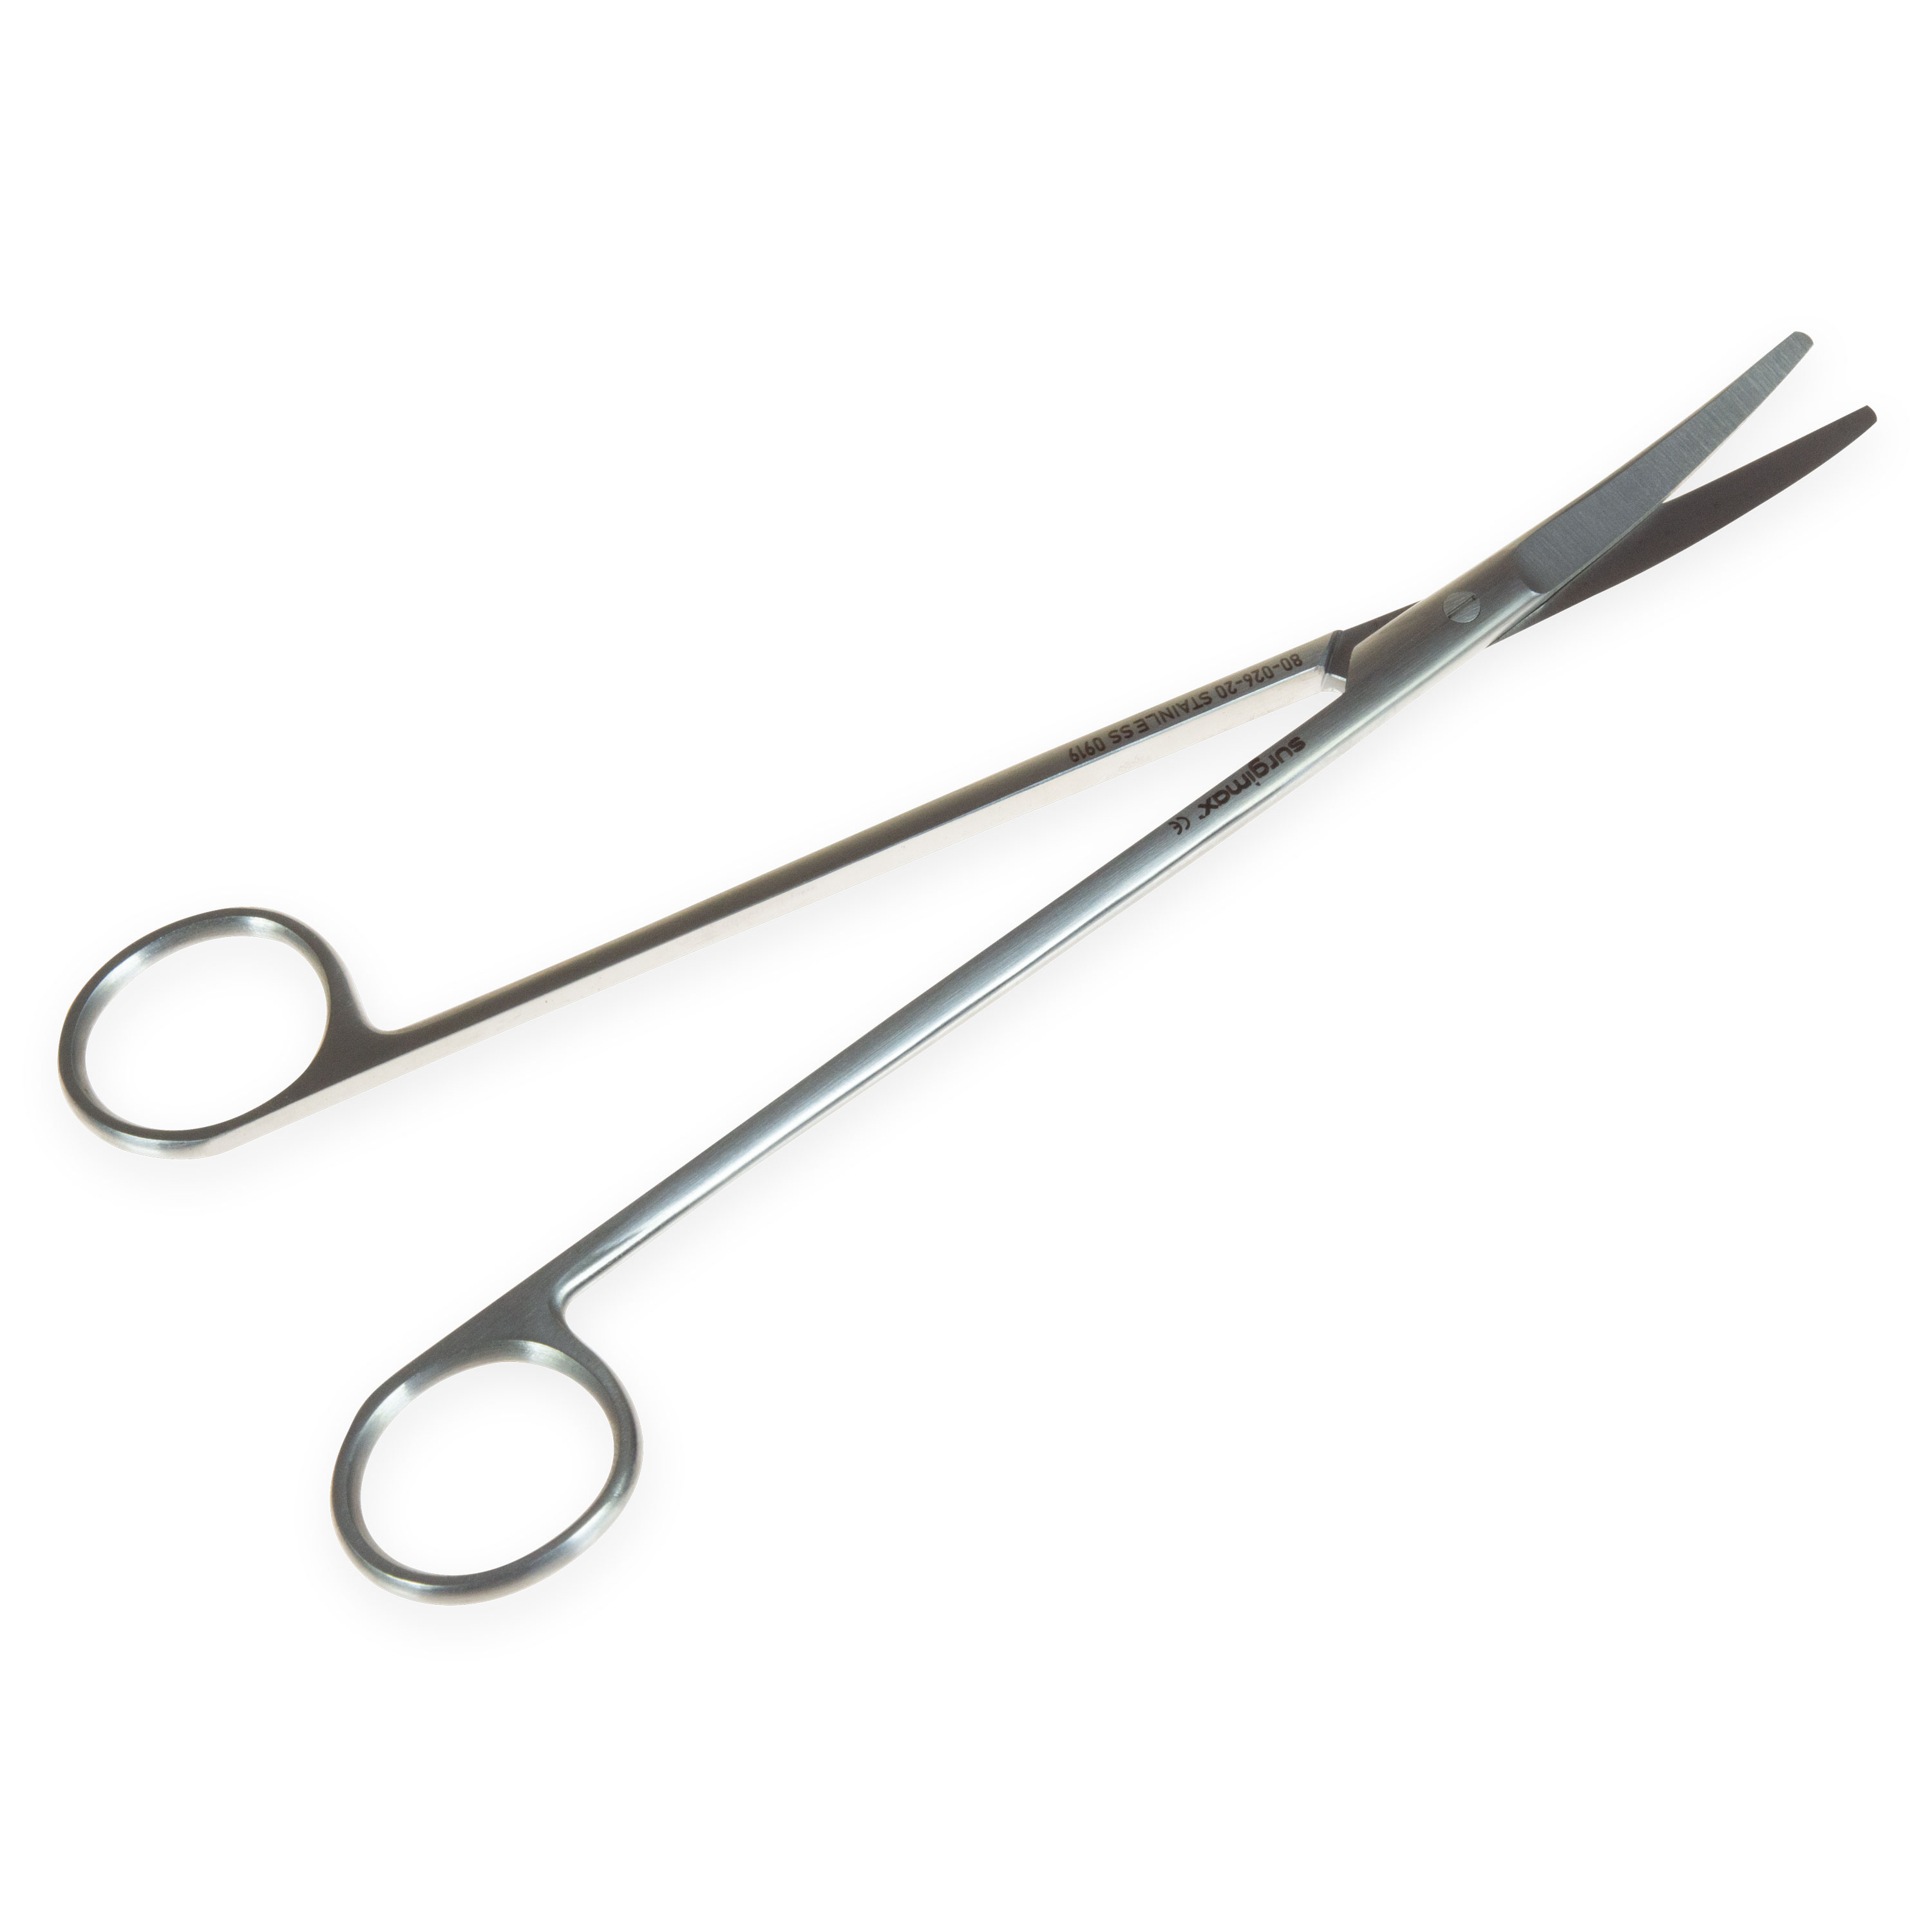 Mayo Scissors short curved blades no tips 20 cm open